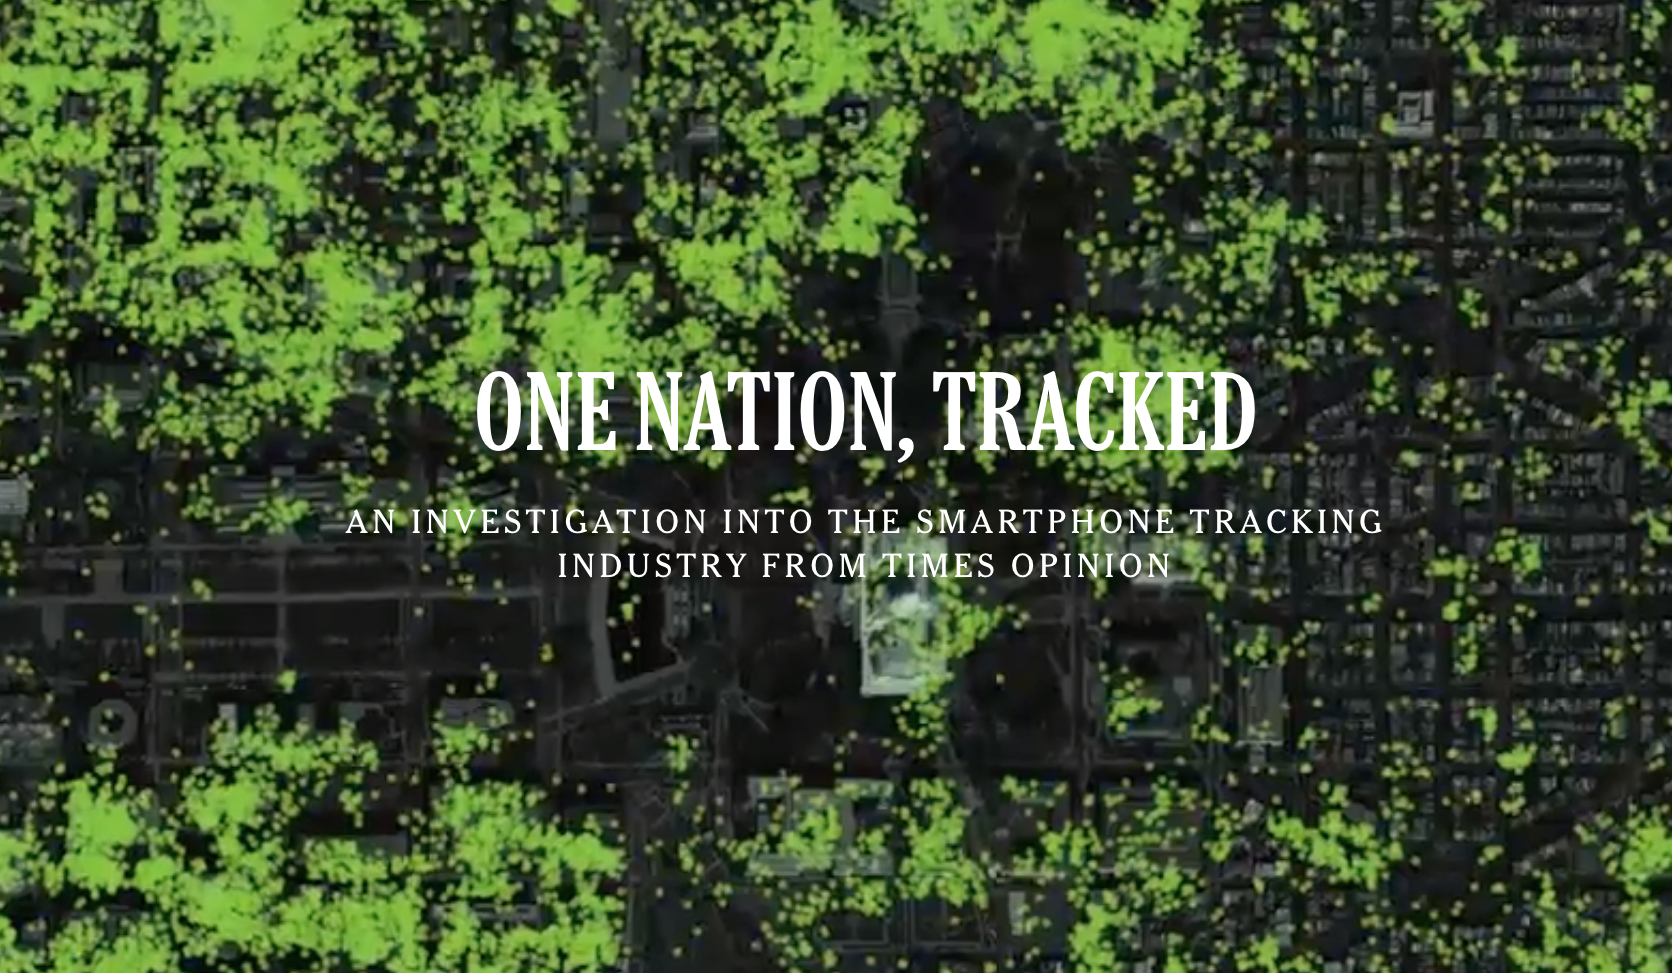 Title Image from the New York Times article "One Nation, Tracked"